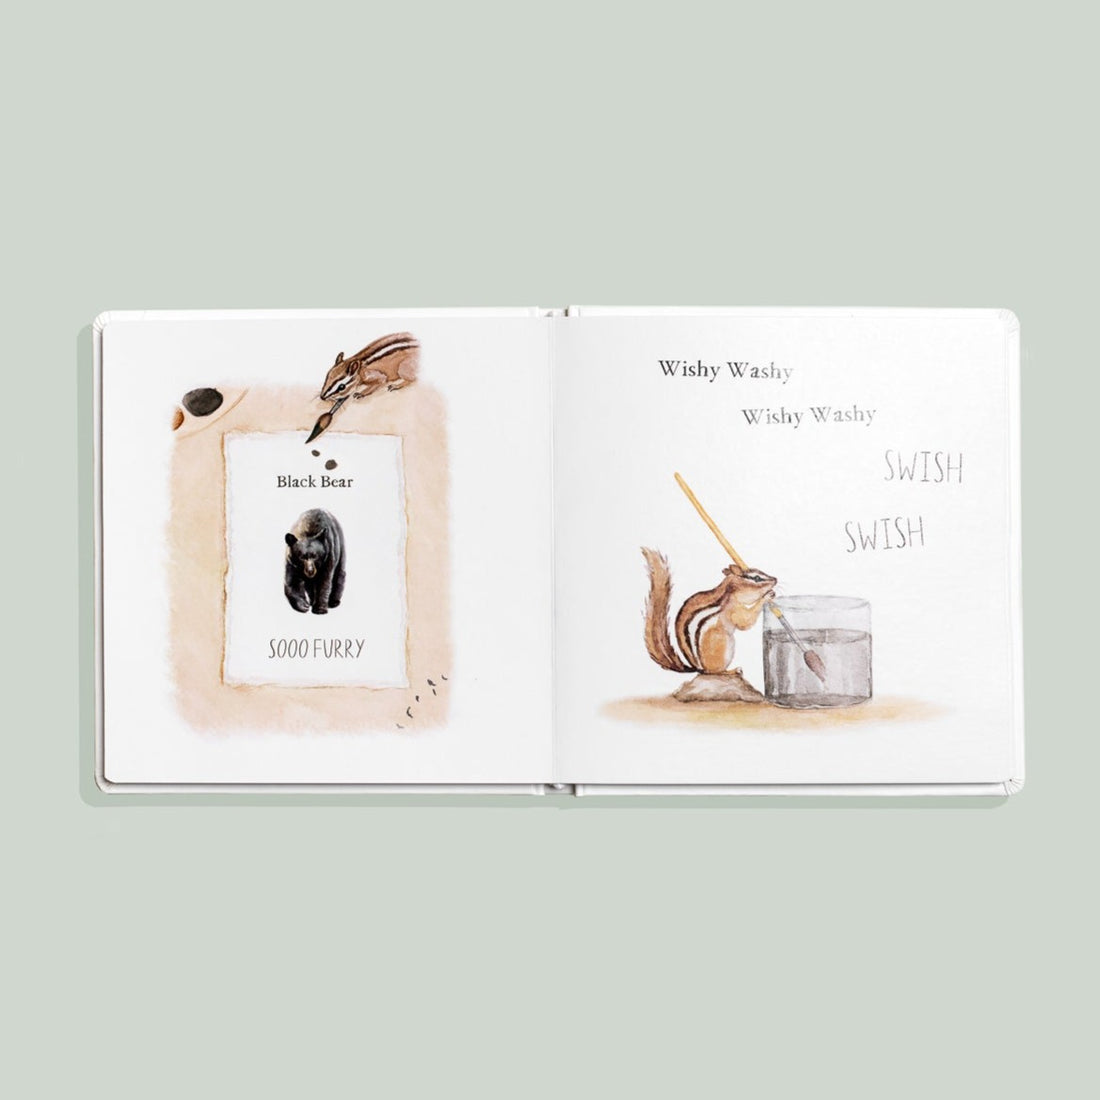 Wishy Washy: A Board Book of First Words and Colors – Paige Tate and Co.